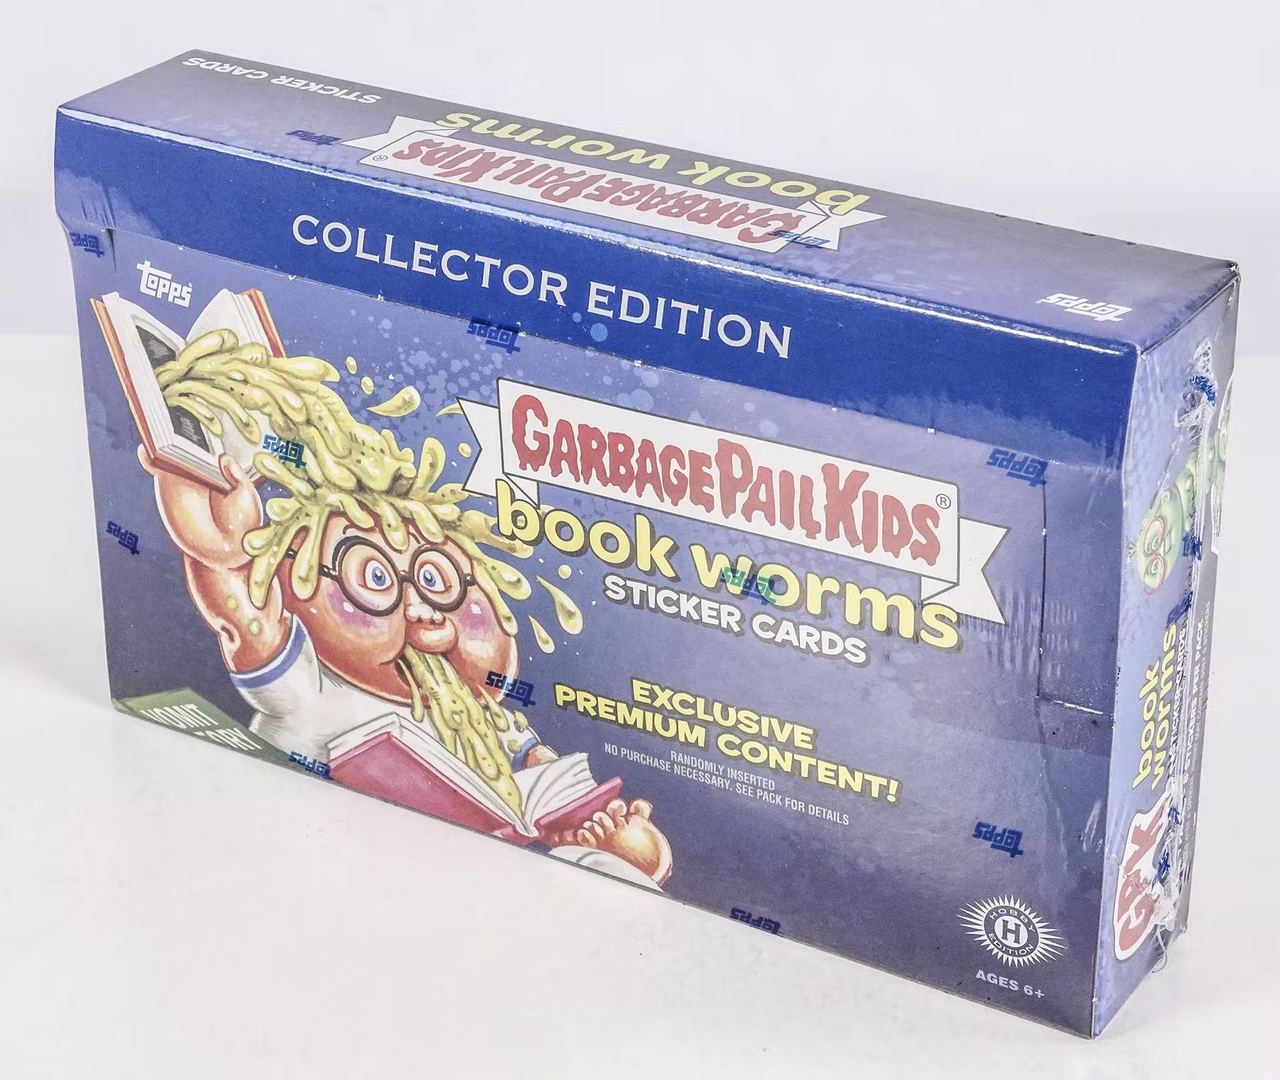 2022 Topps Garbage Pail Kids Series 1 (Book Worms) Collector Edition Box